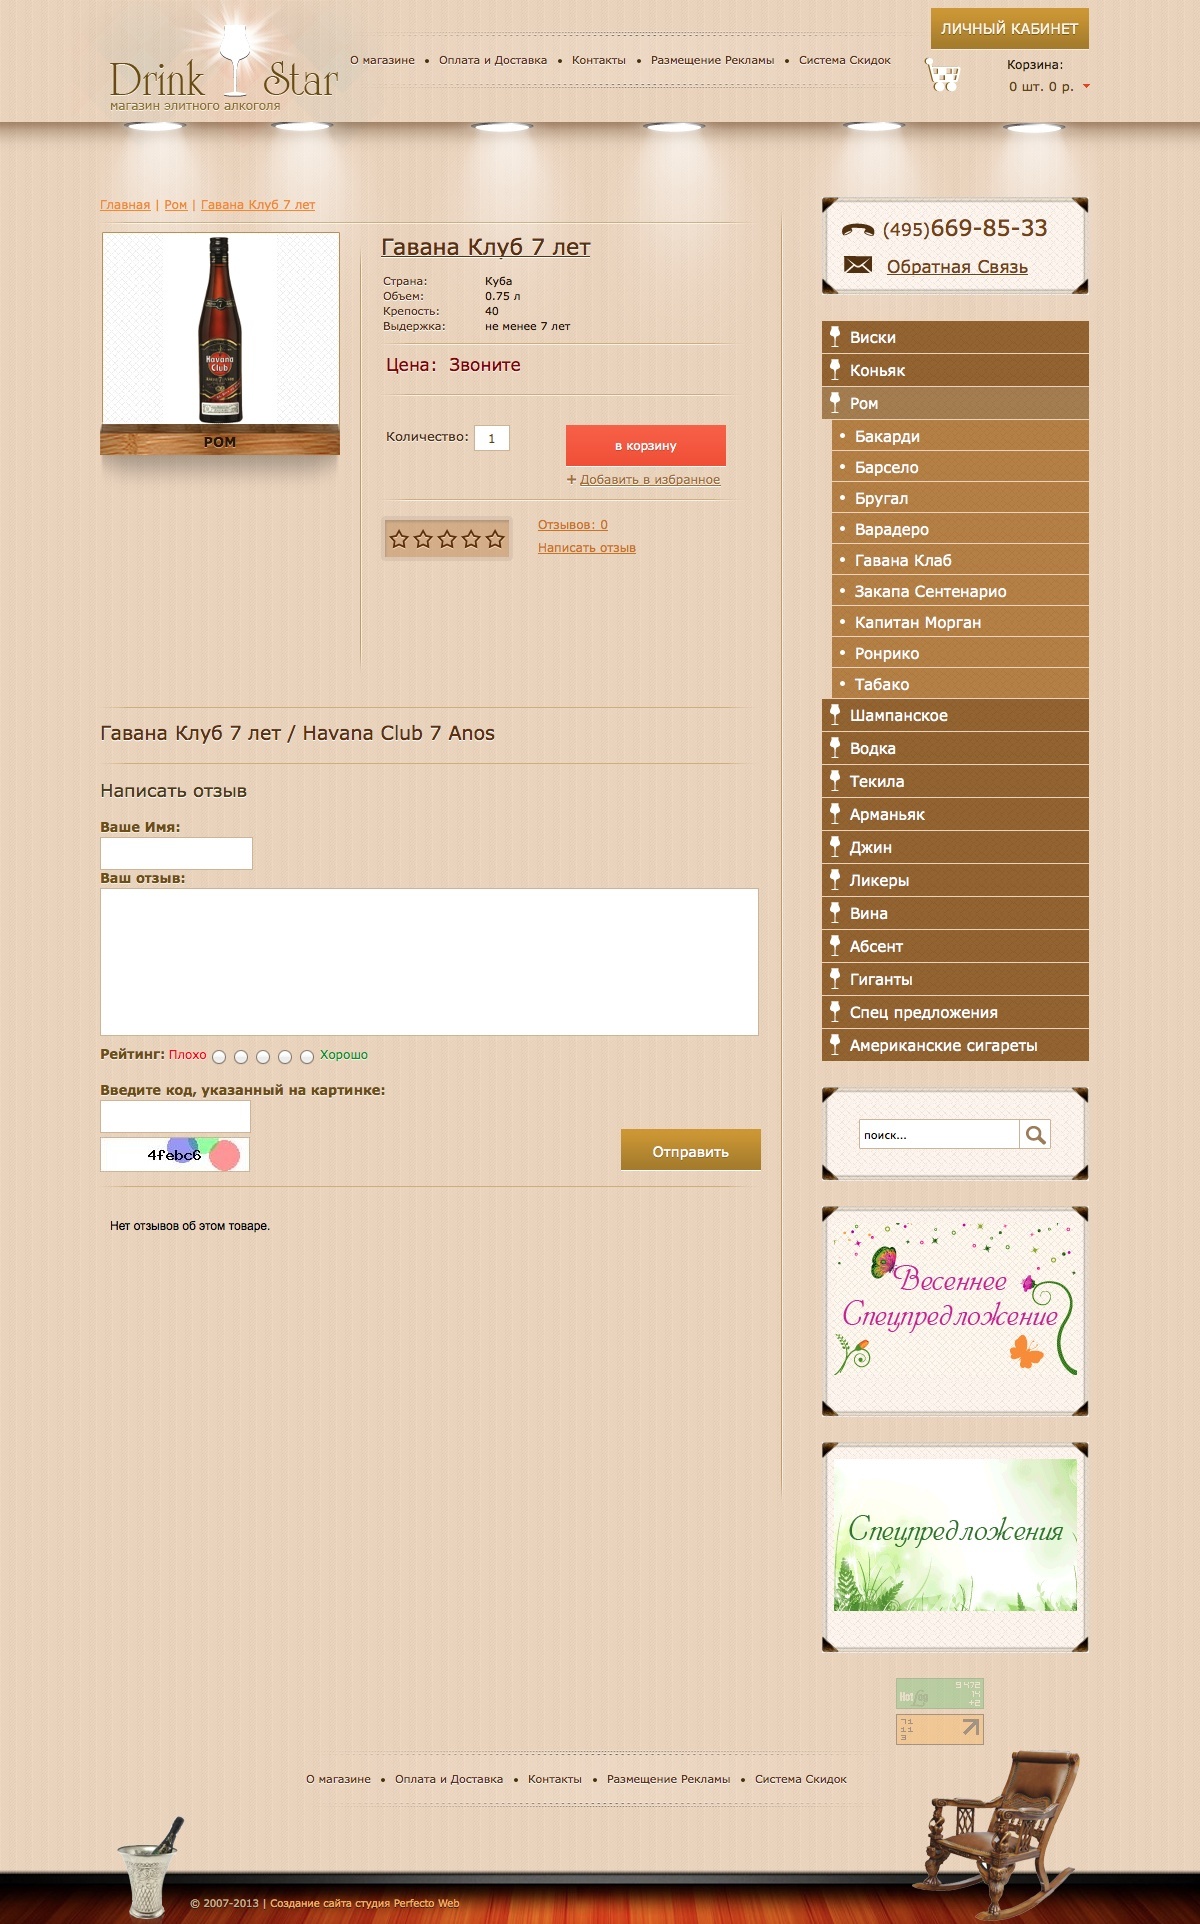 Drink Star №3- Product full description page